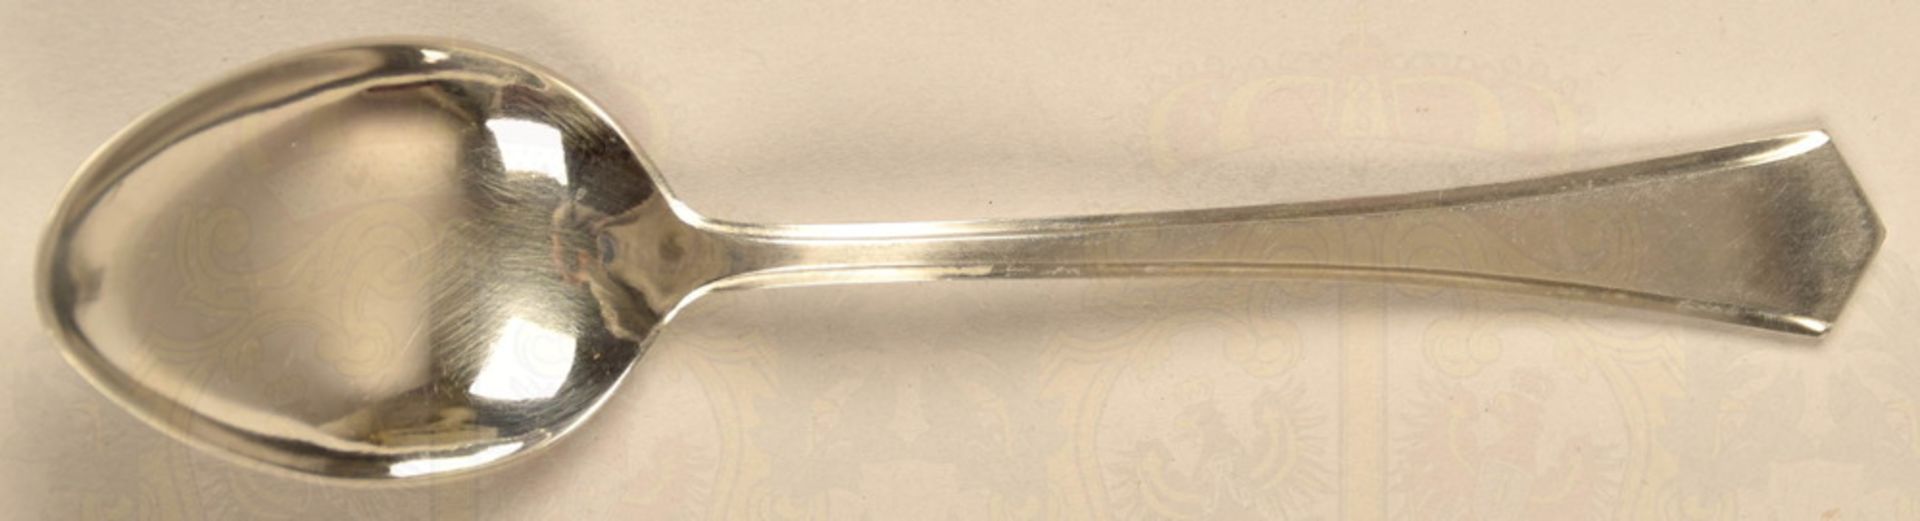 Soup spoon of the General SS